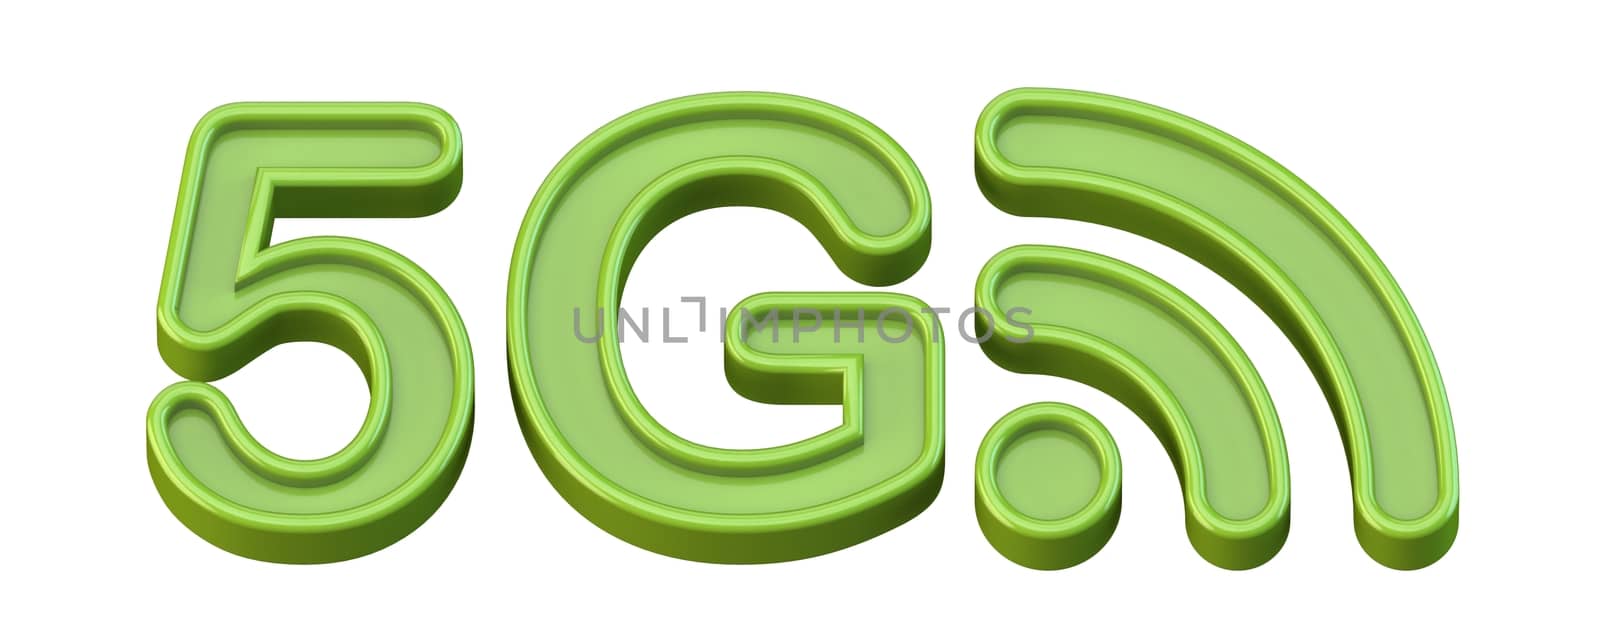 Green 5G icon 3D by djmilic